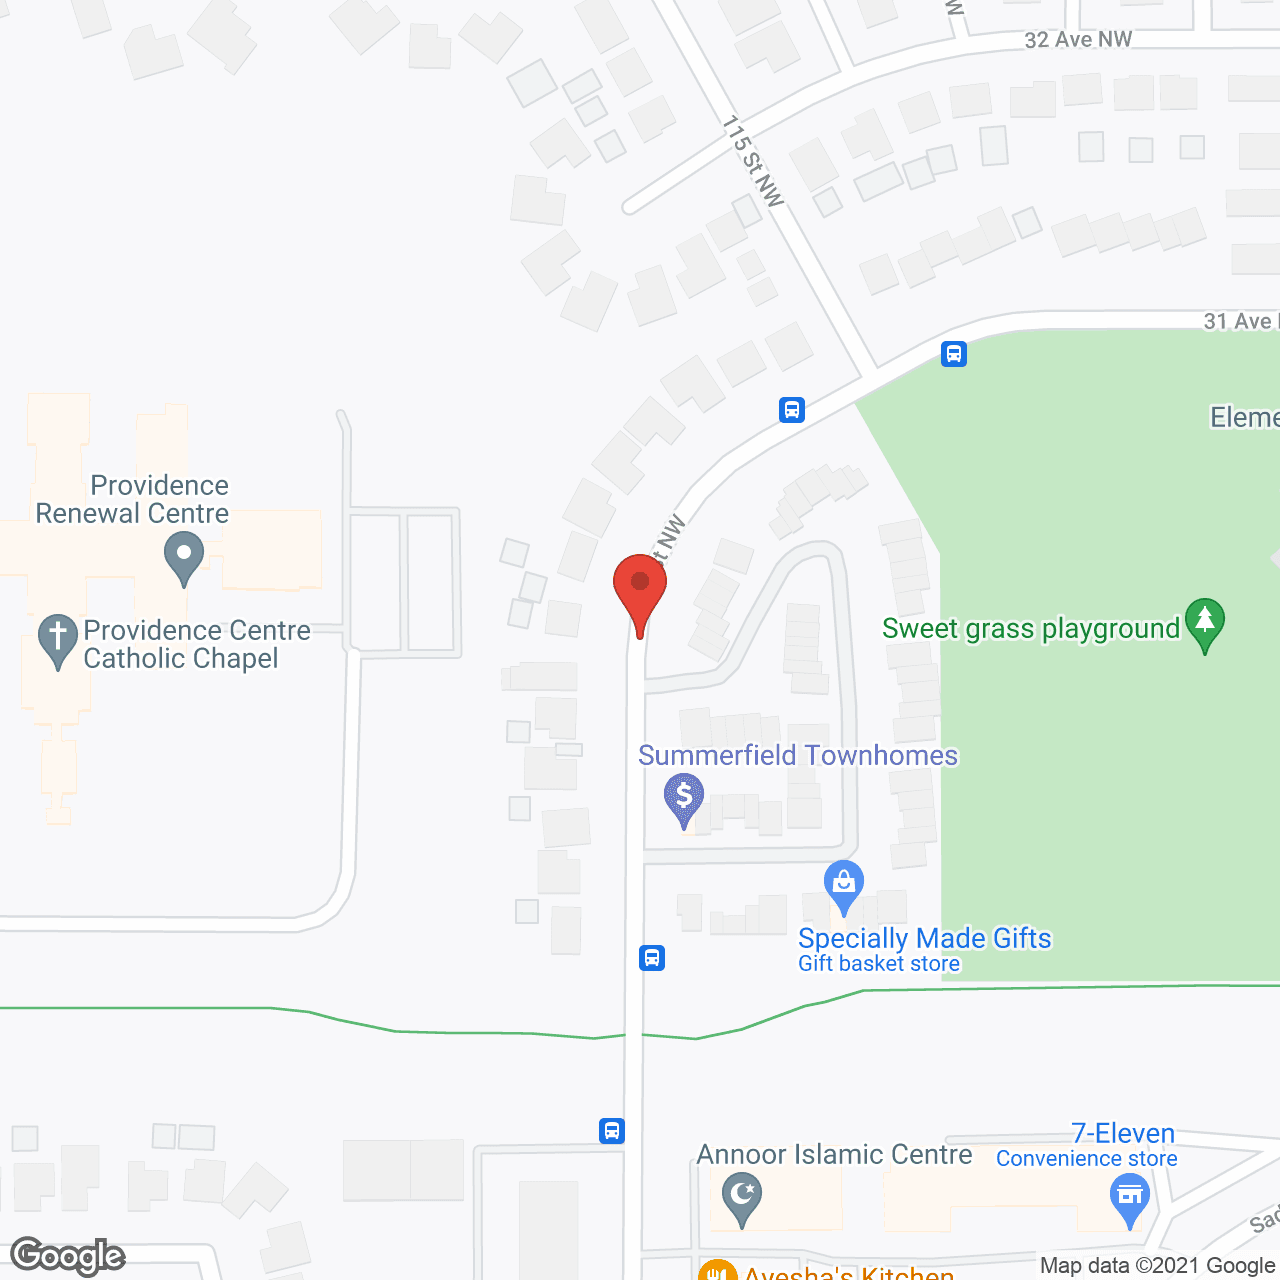 Summerfield Townhomes in google map